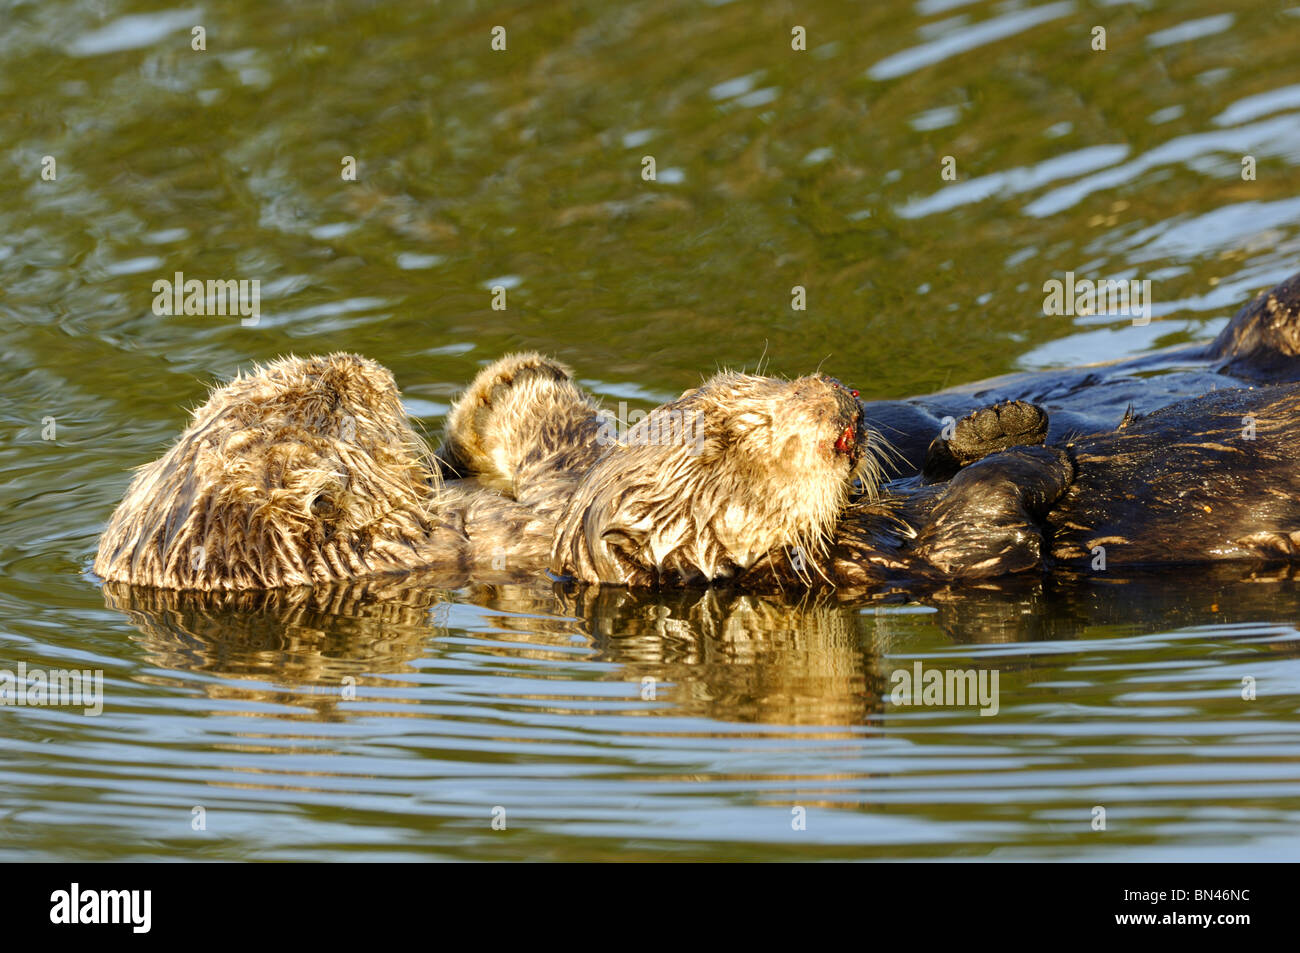 Stock photo of a breeding pair of California sea otters floating together on their backs.  The female's nose is bloody. Stock Photo